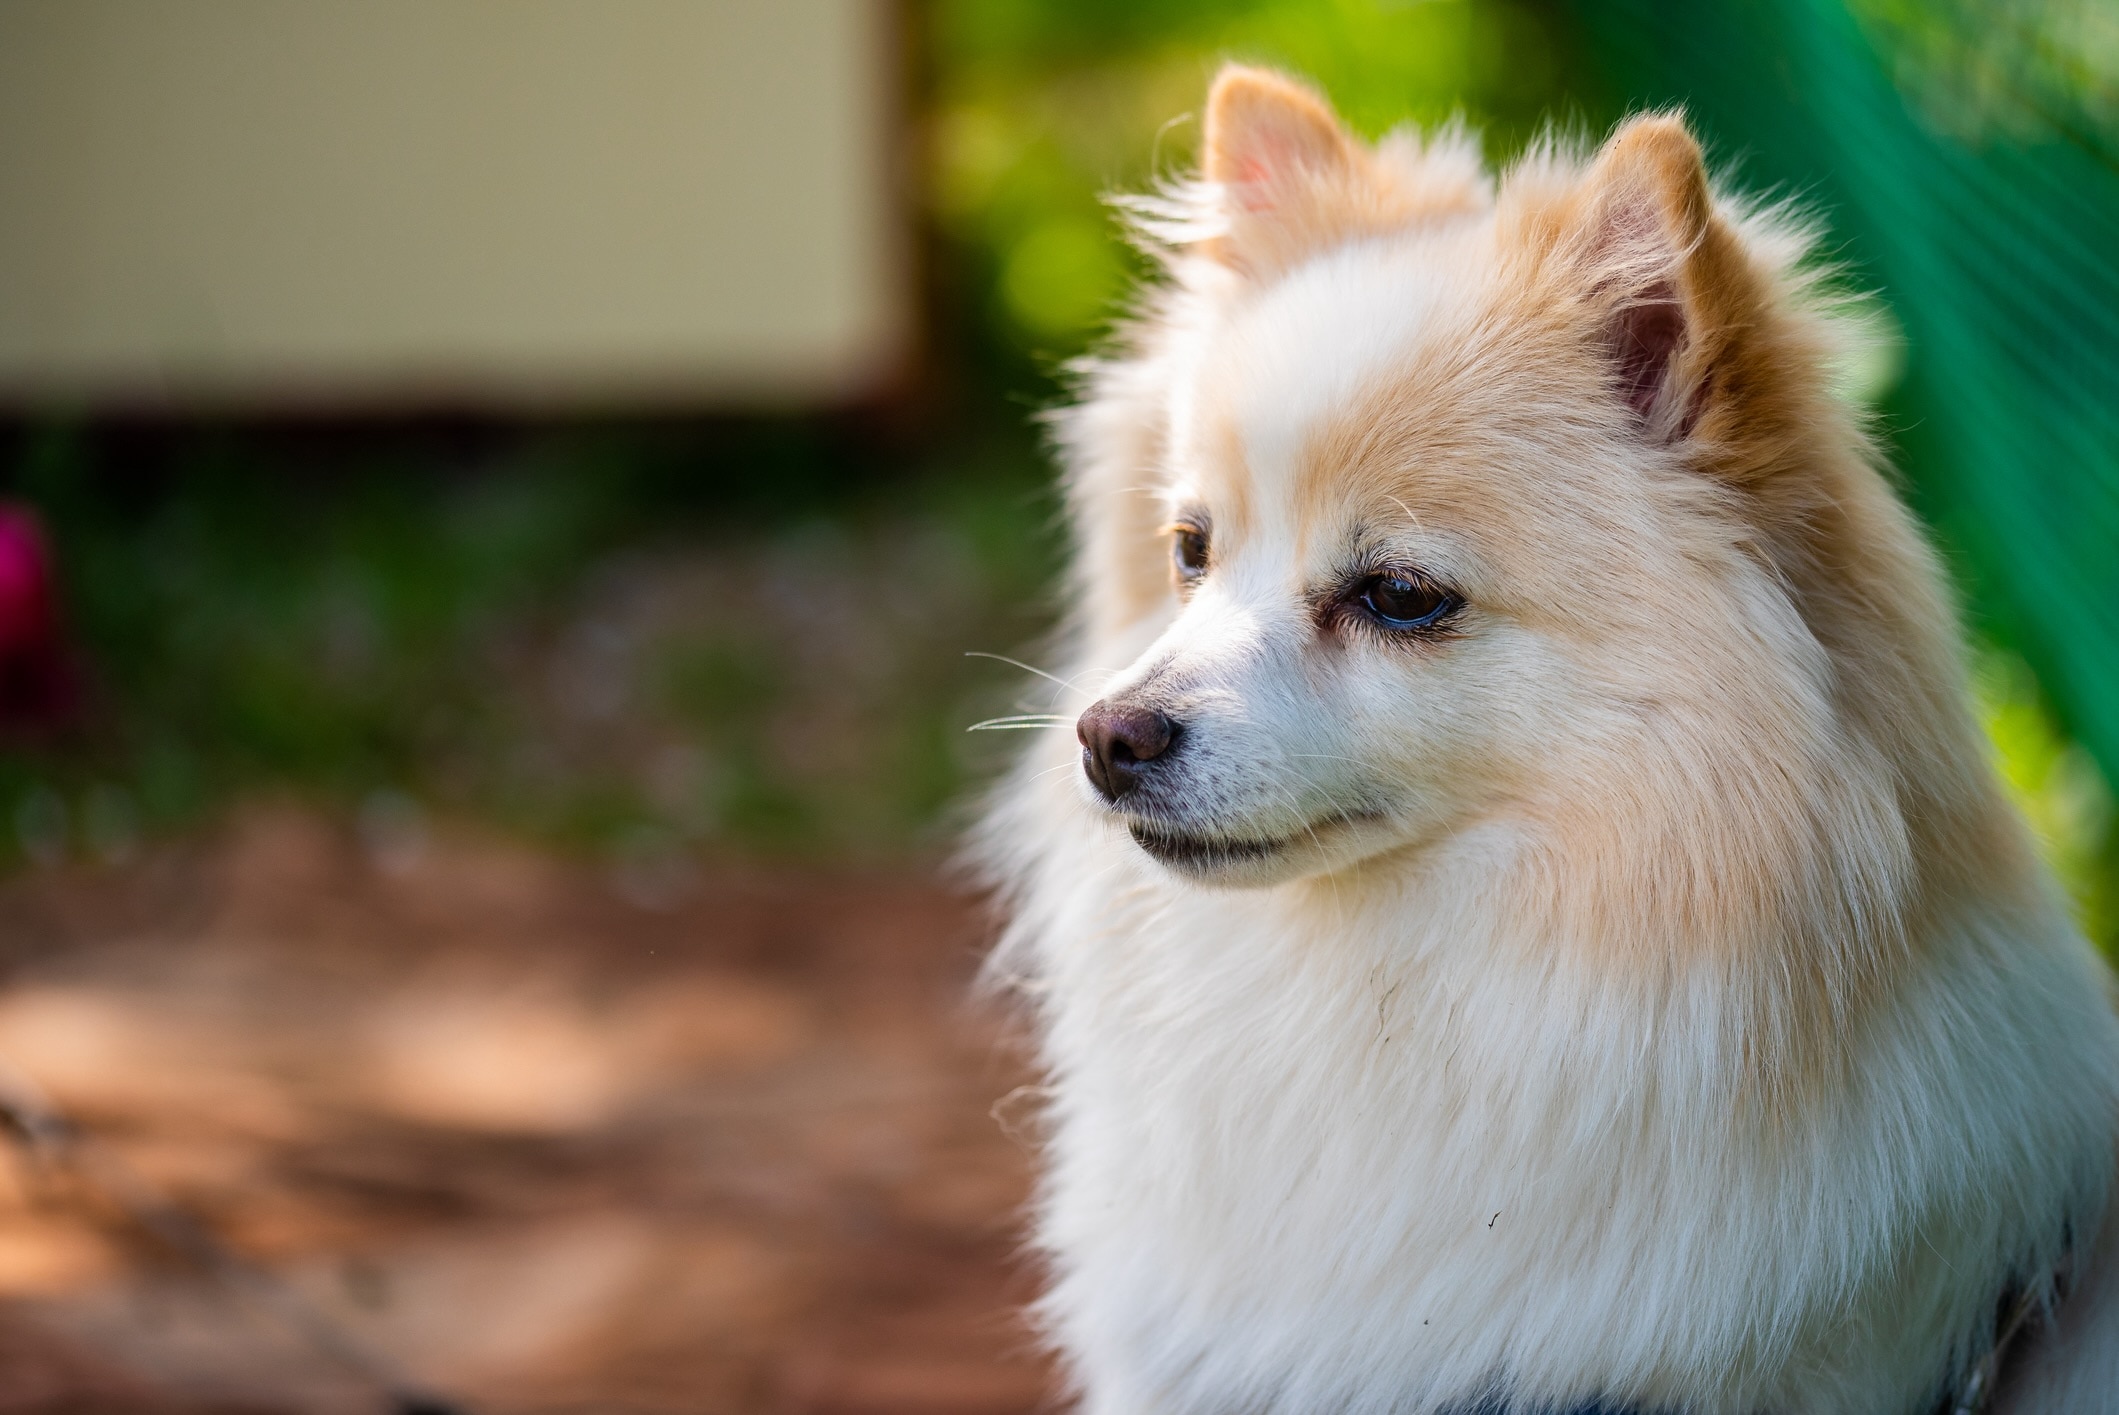 close-up of a white and cream colored german spitz dog's face